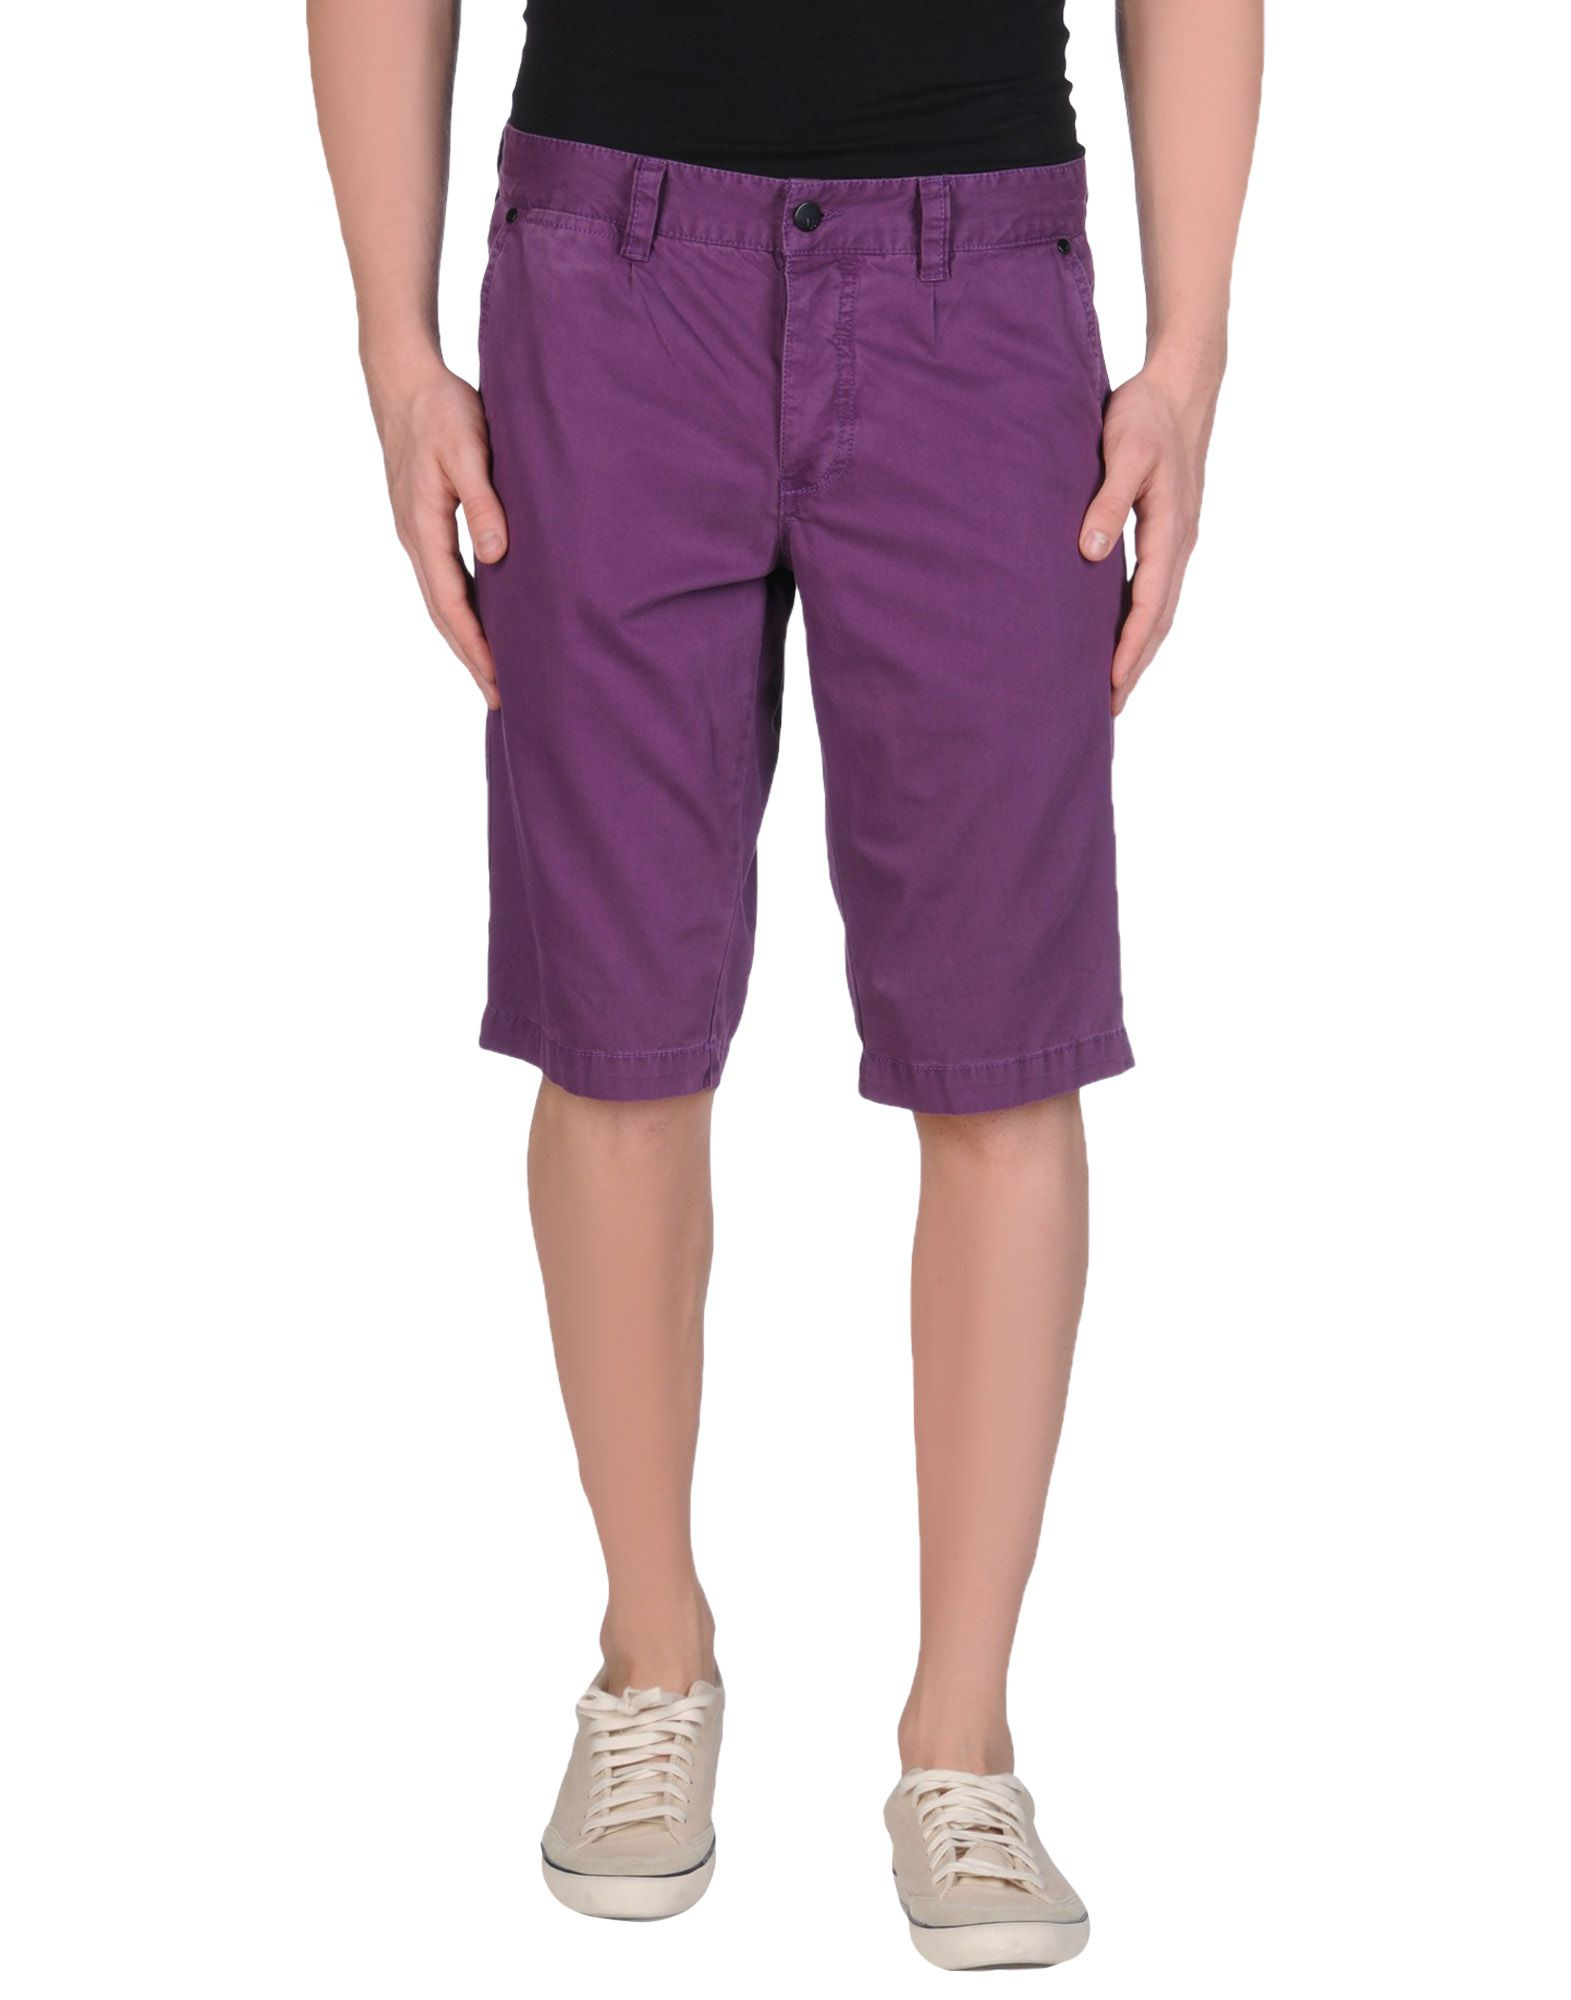 What To Wear With Purple Bike Shorts For Men